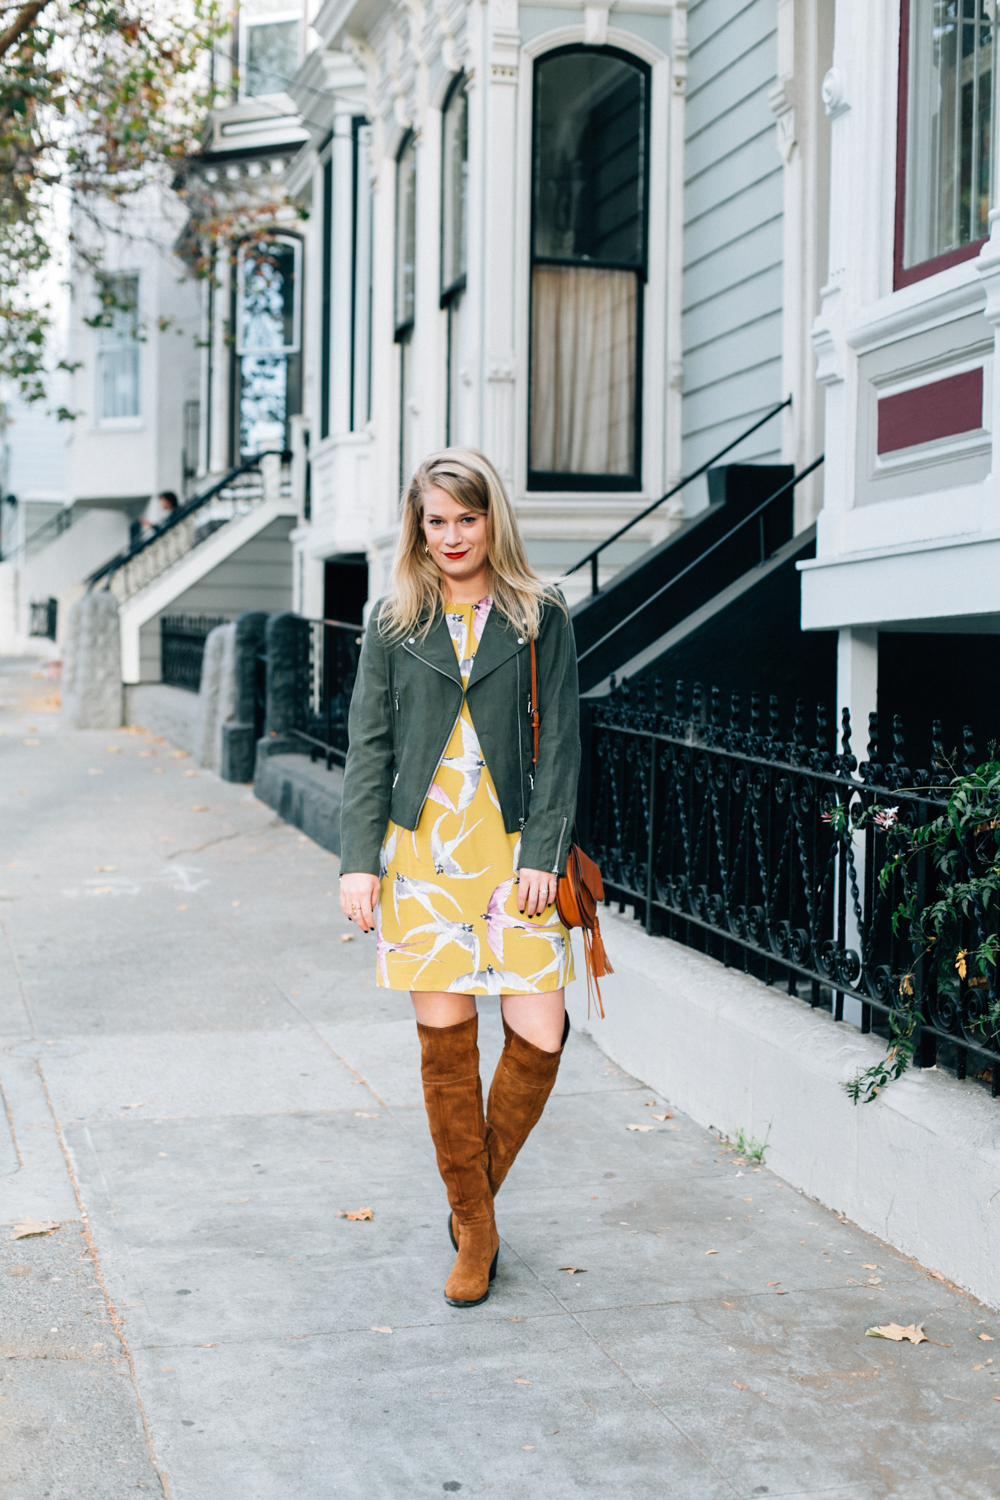 Fall Outfit Inspiration // Ann Taylor Shift Dress with Olive Club Monaco Moto Jacket and Steve Madden Over the Knee Boots.